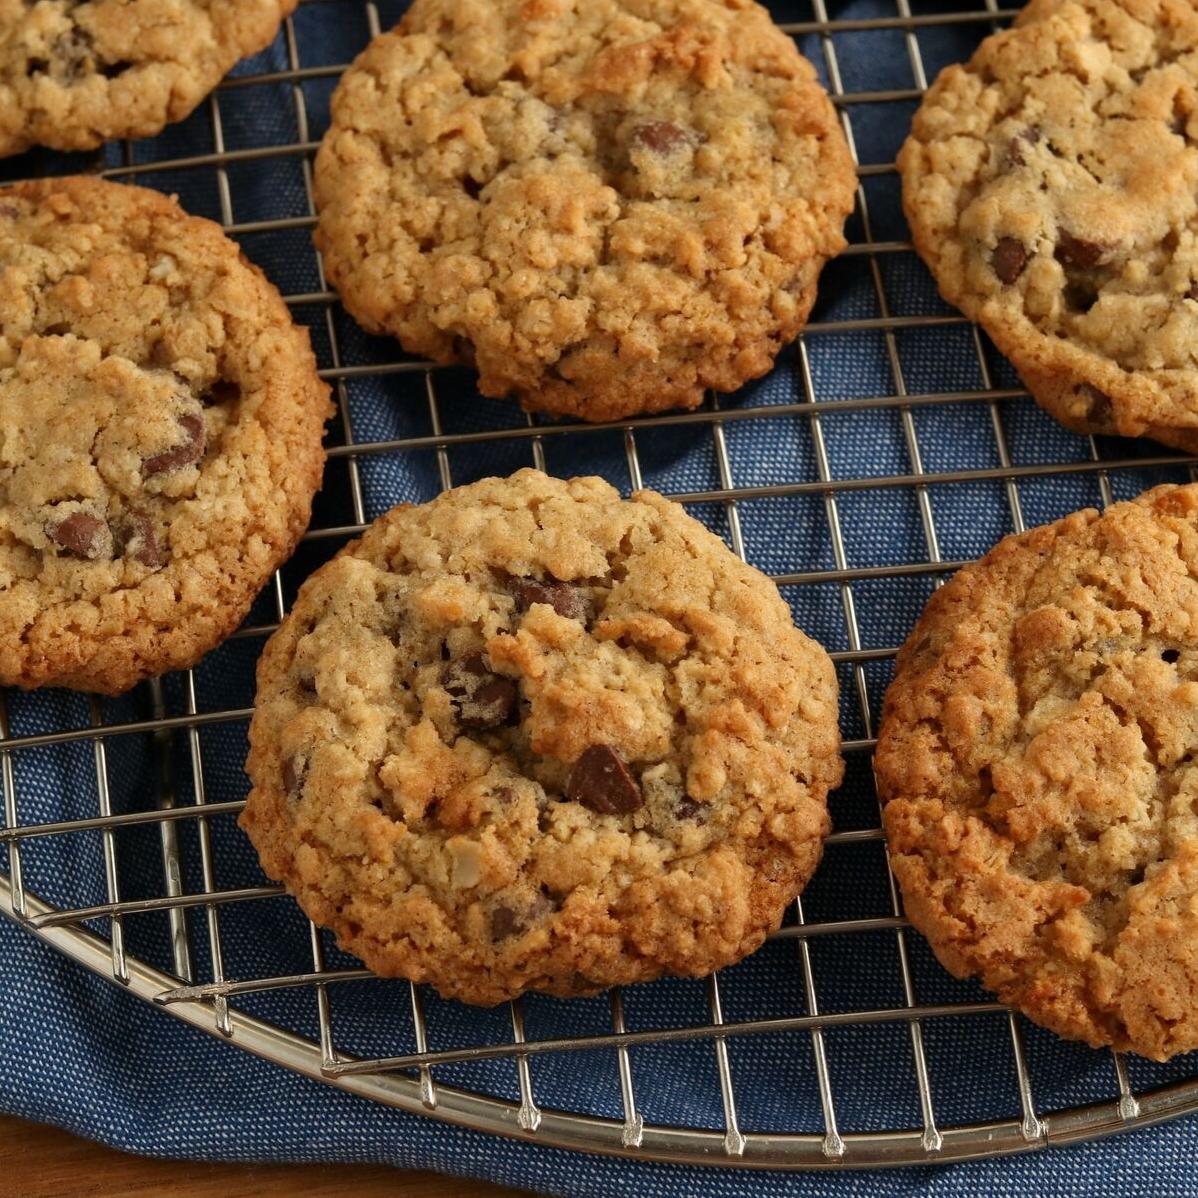  These cookies contain no oats, but they look and taste like they do